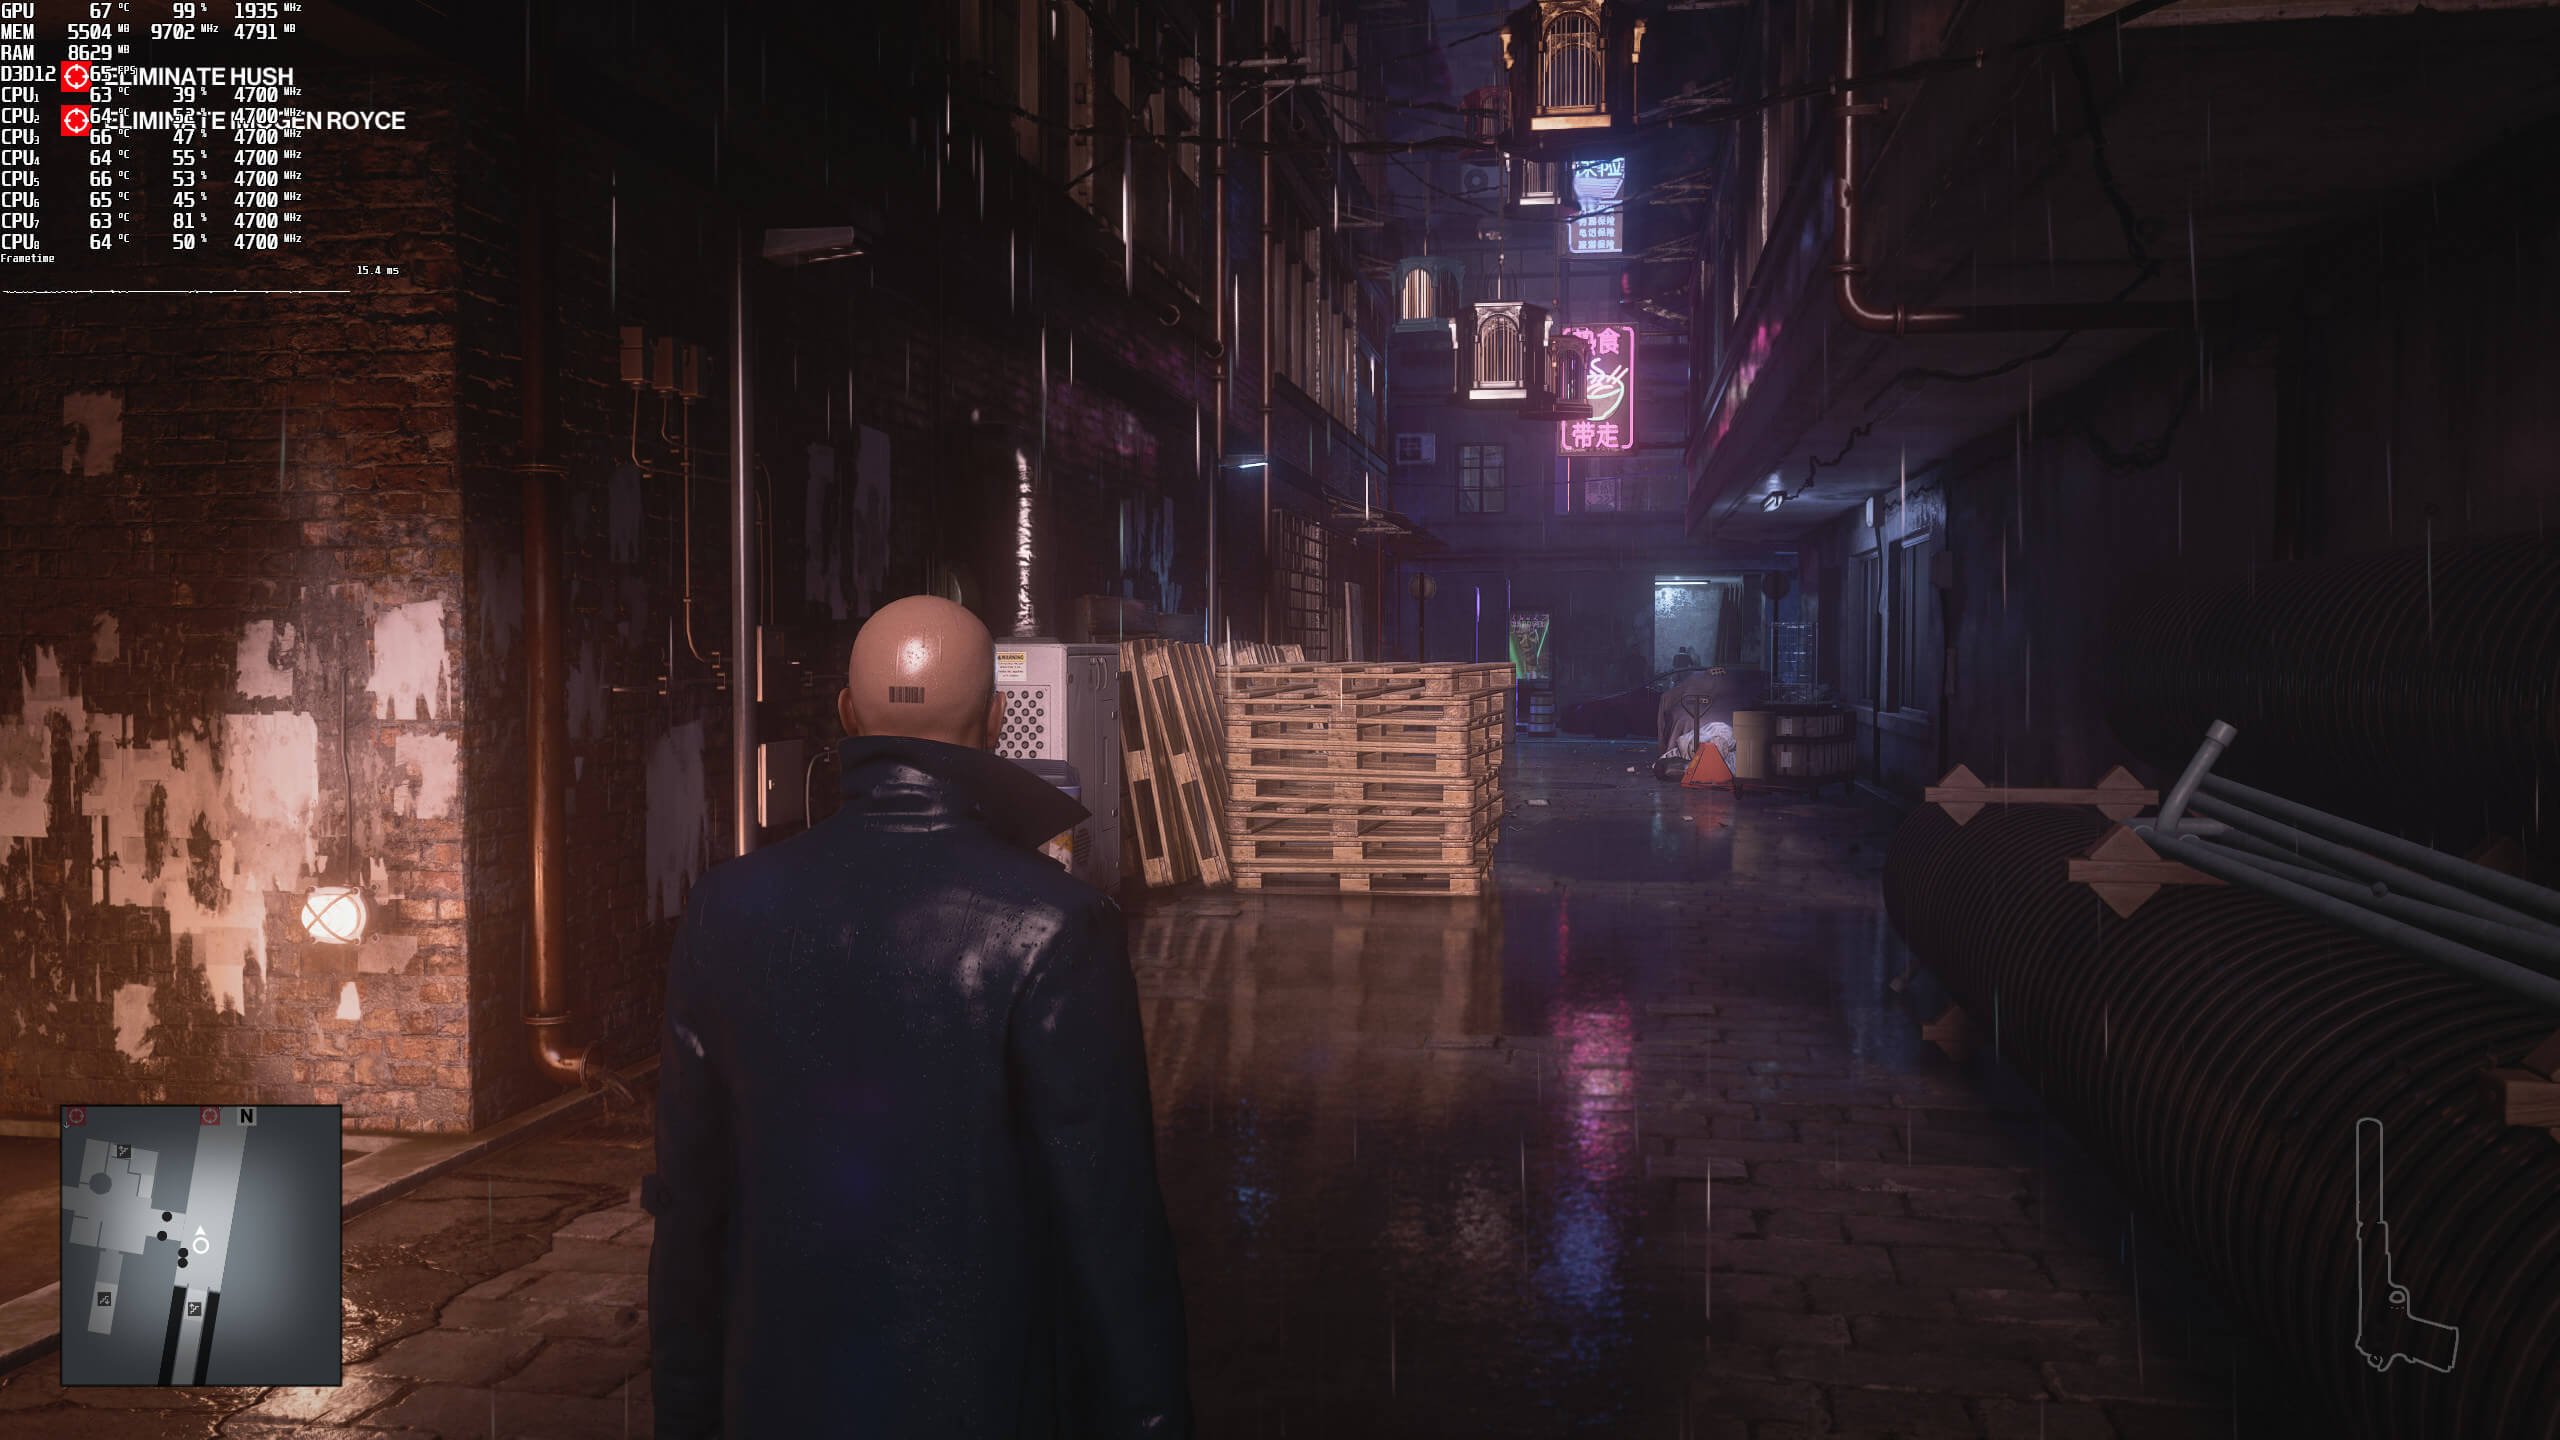 HITMAN 3 Game Ready Driver: The Definitive #RTXON Experience With NVIDIA  DLSS & Ray Tracing, GeForce News